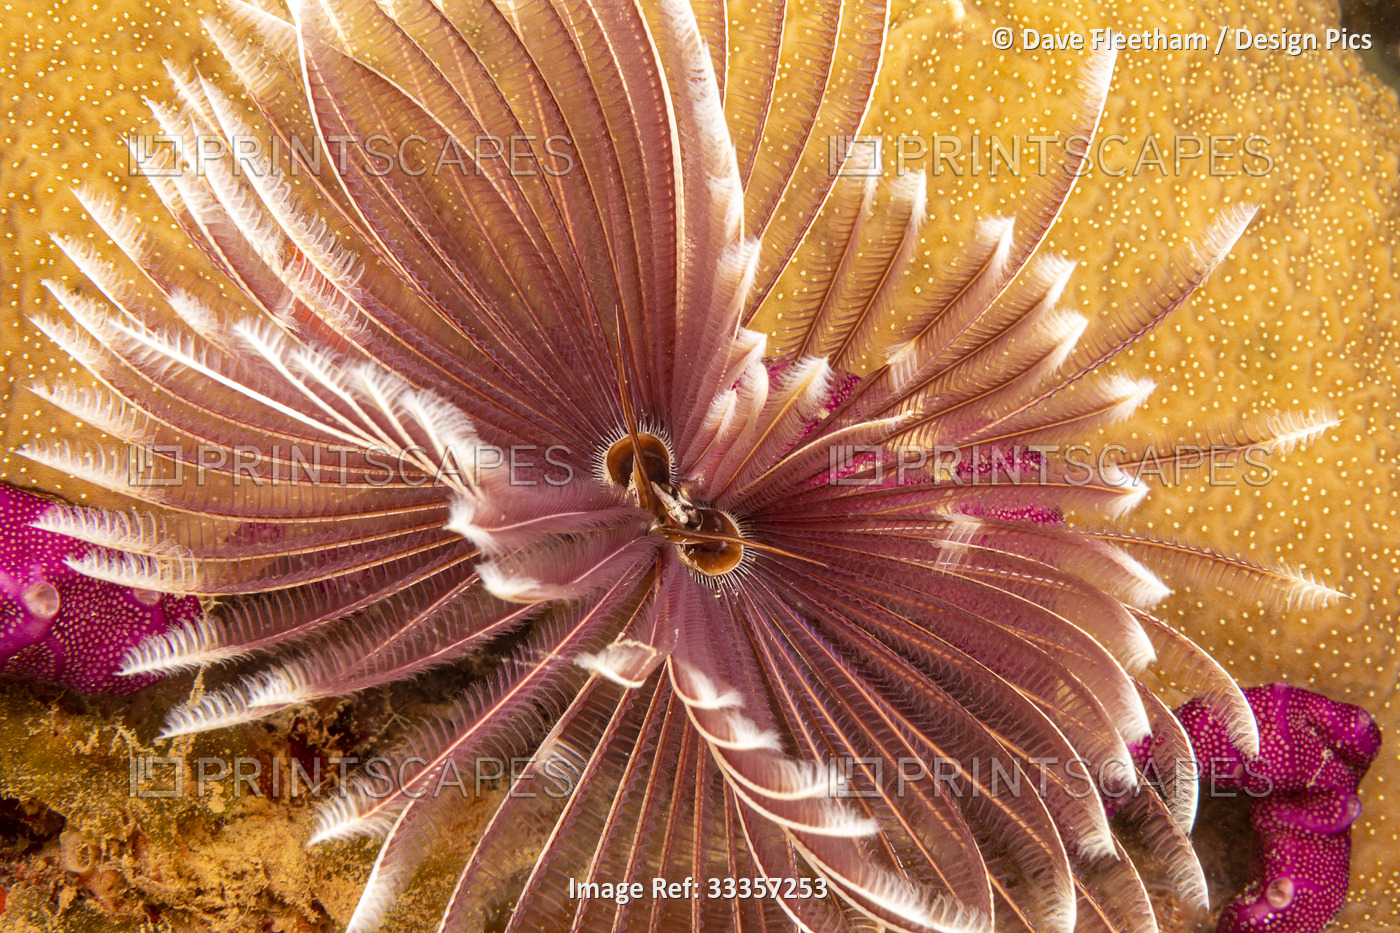 The Indian feather duster worm (Sabellastarte indica) is one of the larger of ...